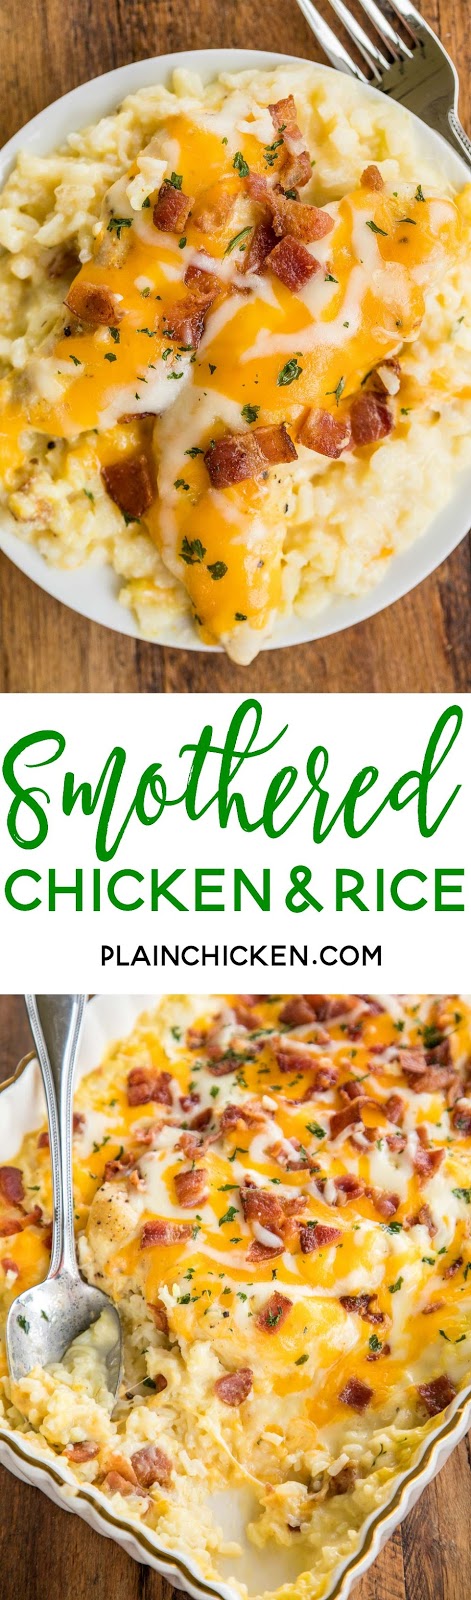 Smothered Chicken and Rice | Plain Chicken®